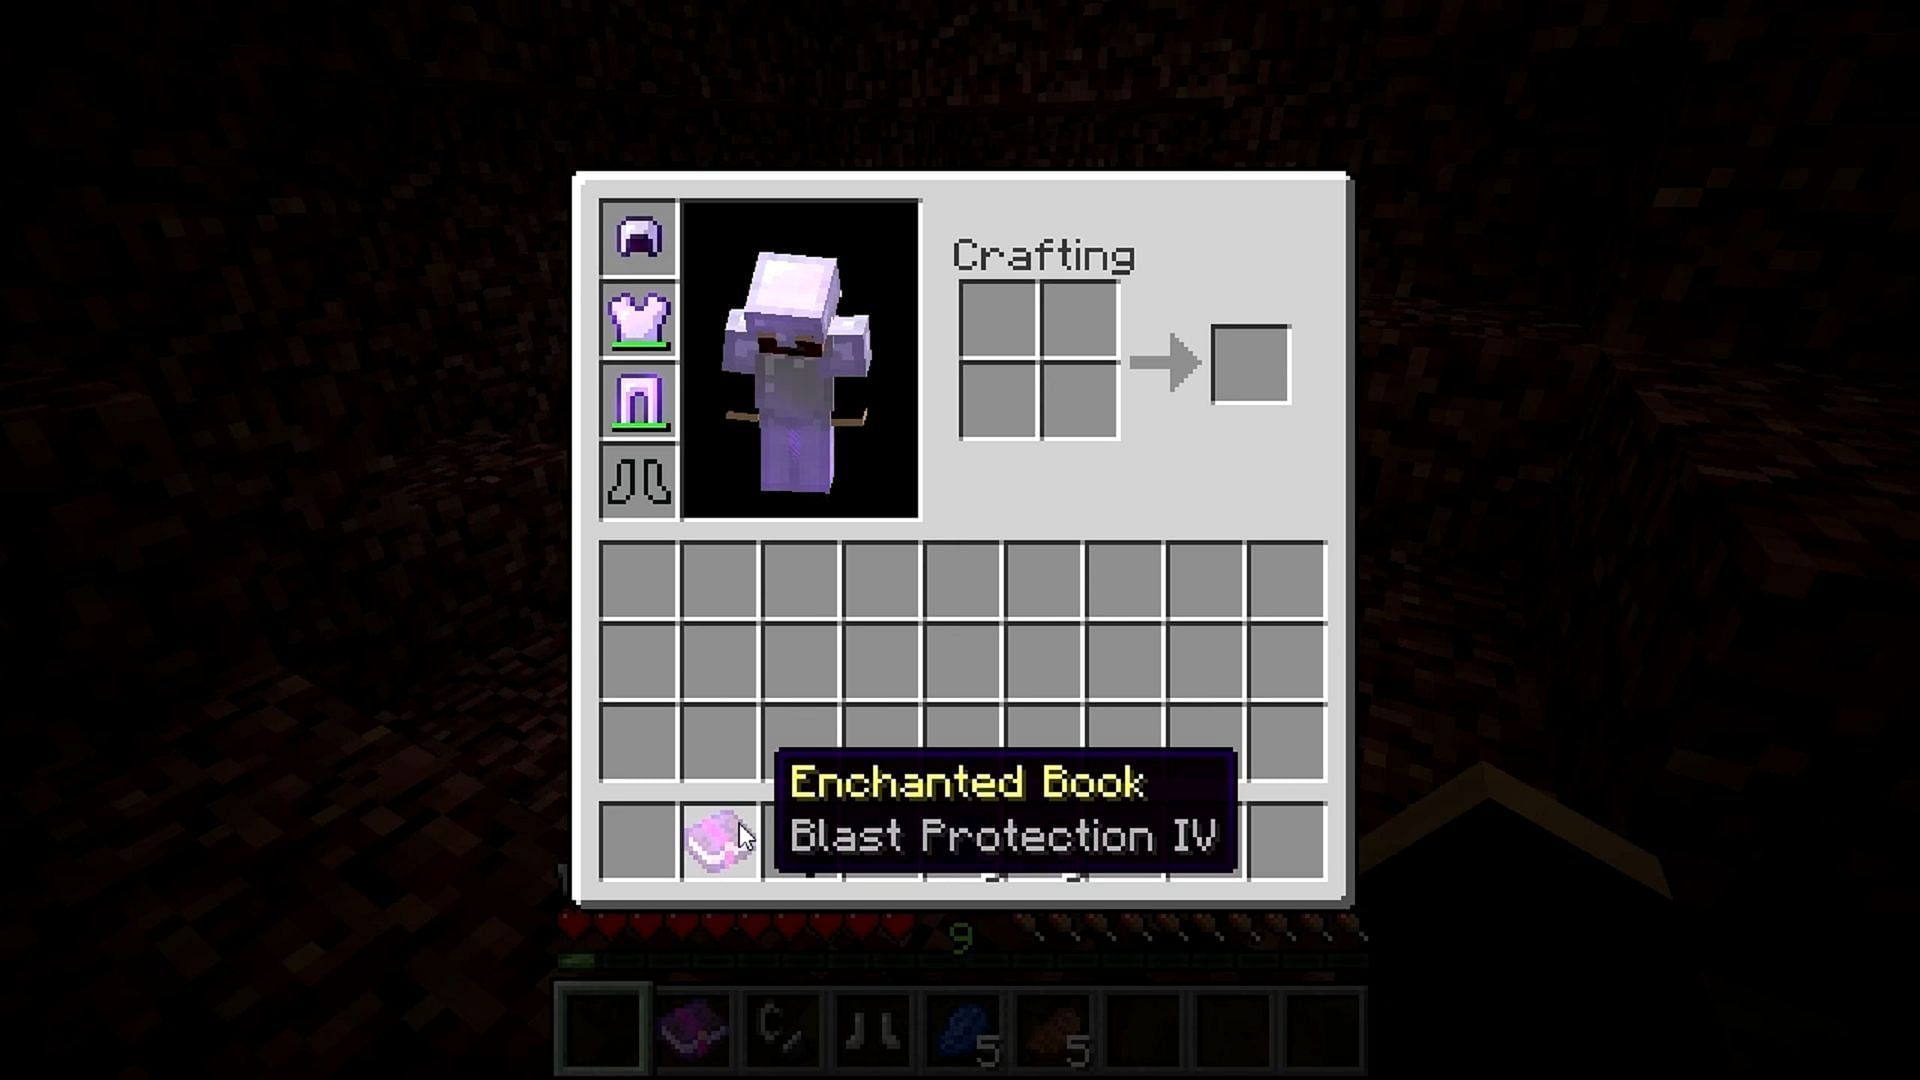 Blast Protection can be a lifesaver when dealing with explosives in Minecraft (Image via Mcspotlights/YouTube)